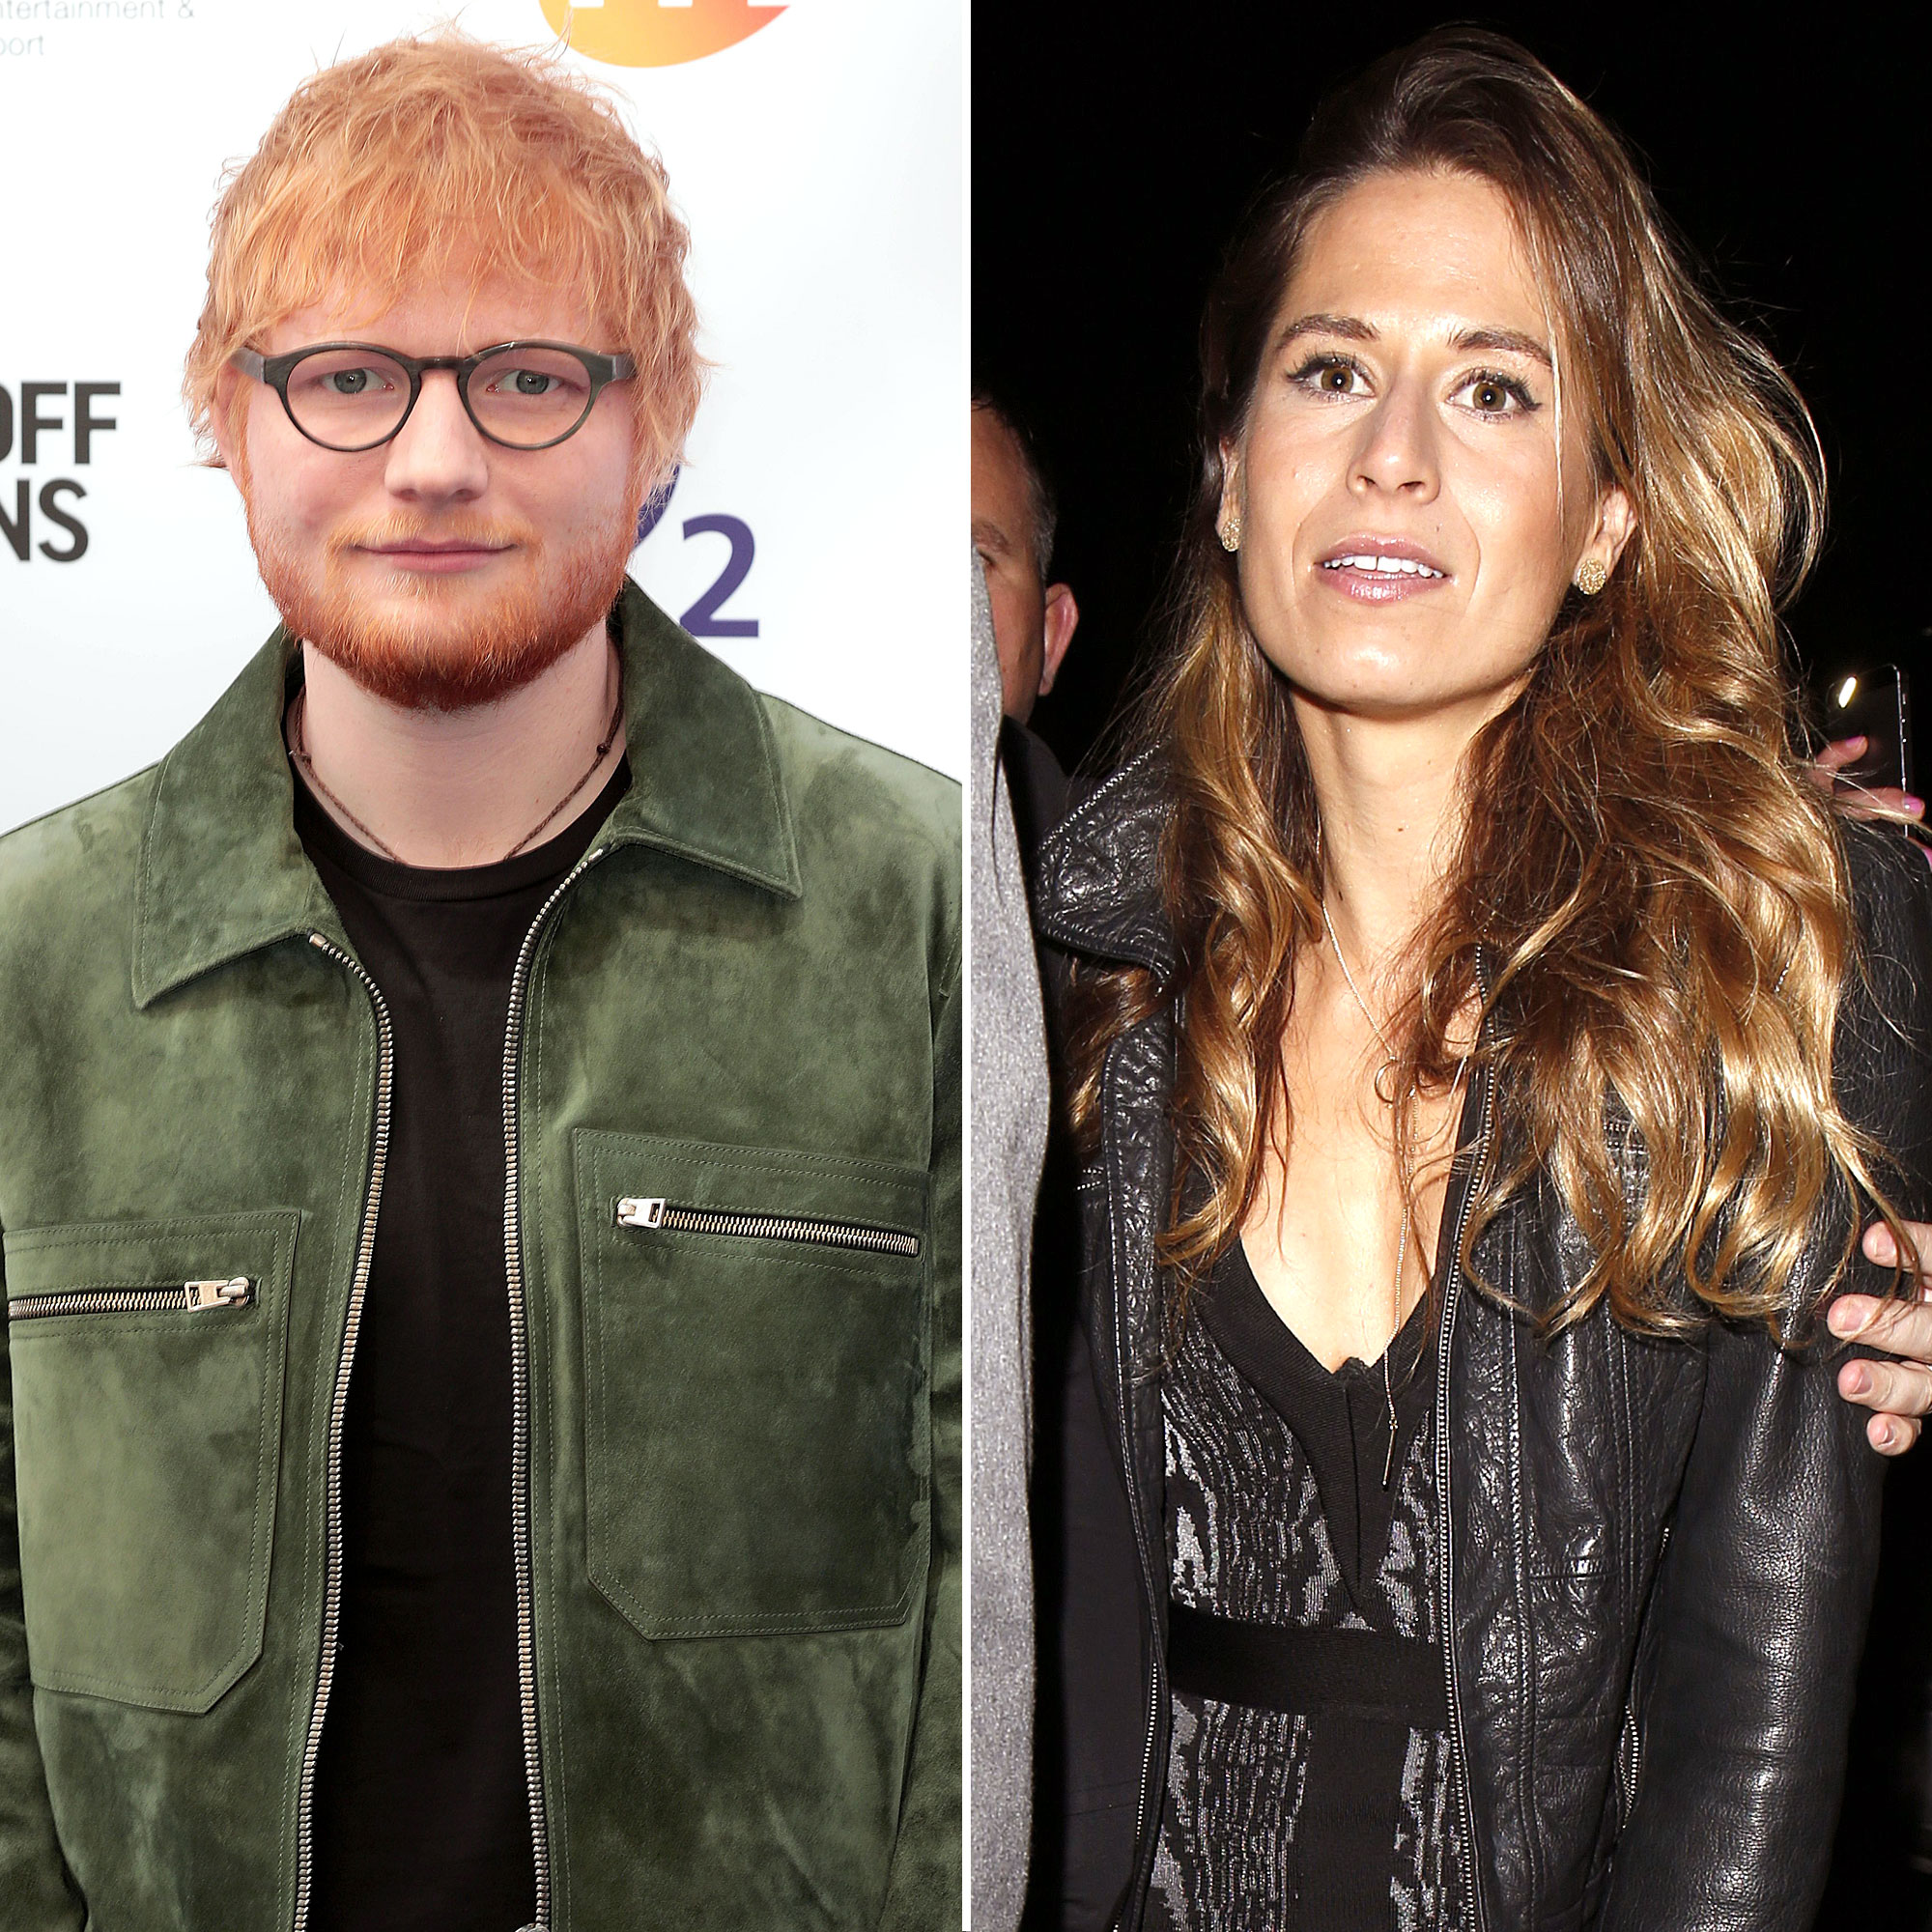 Ed Sheerans Wife Cherry Seaborn Gives Birth to Their 1st Child photo pic